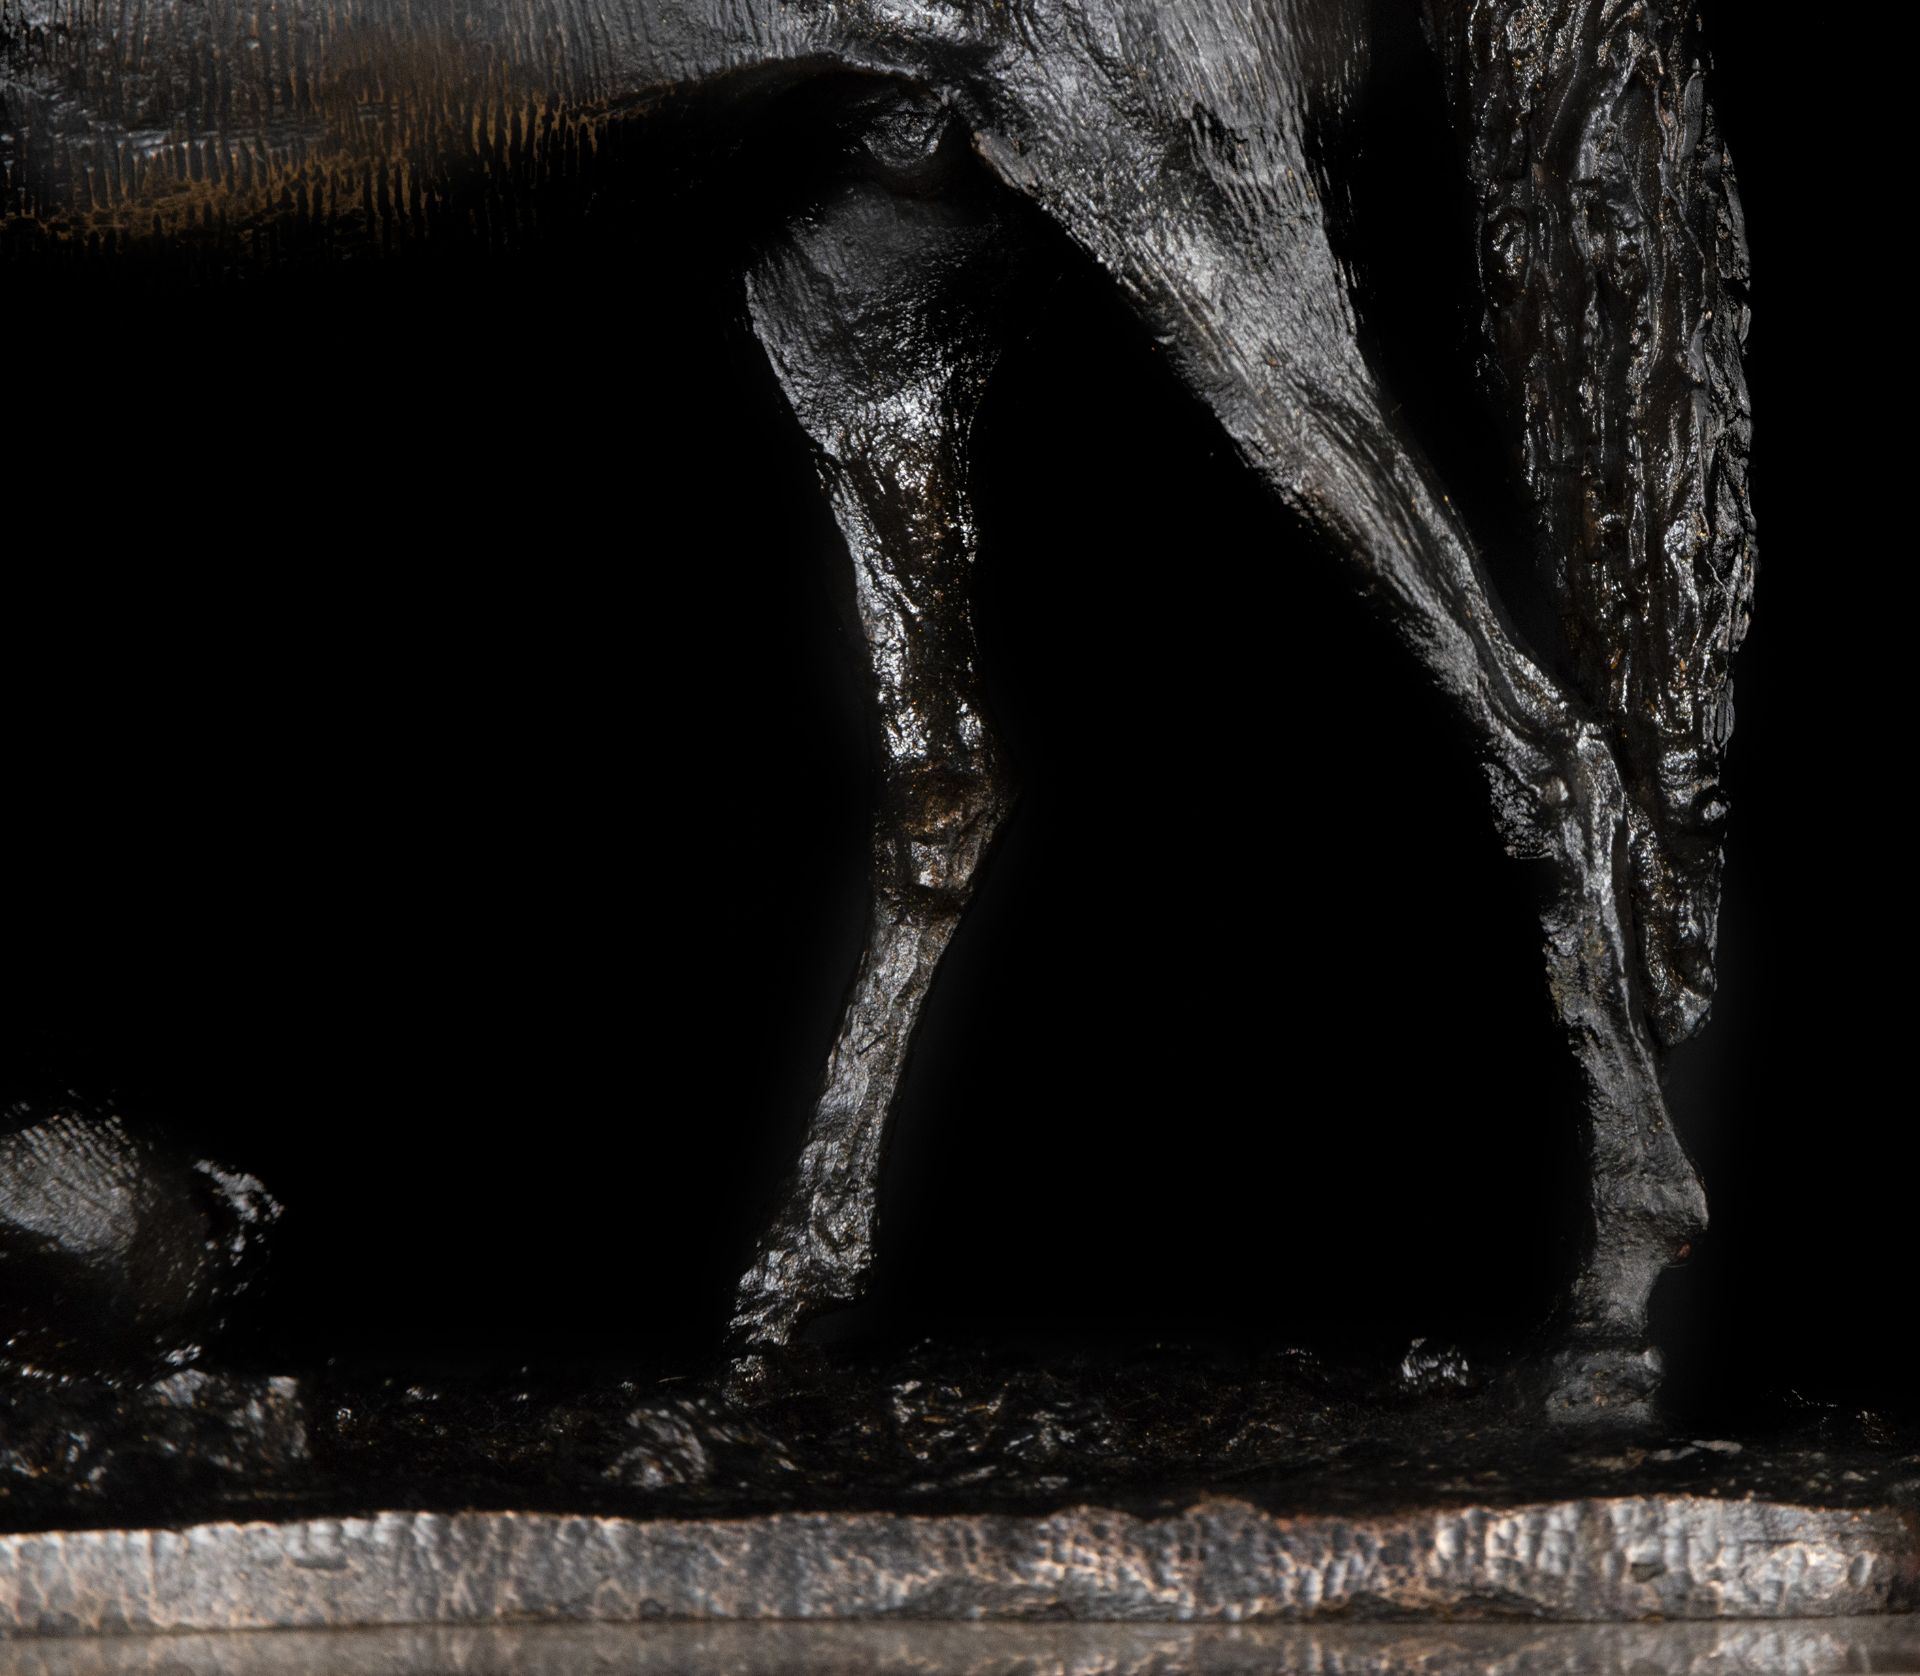 Bronze horse with built-in base, European post-impressionist school of the early 20th century - Image 3 of 5